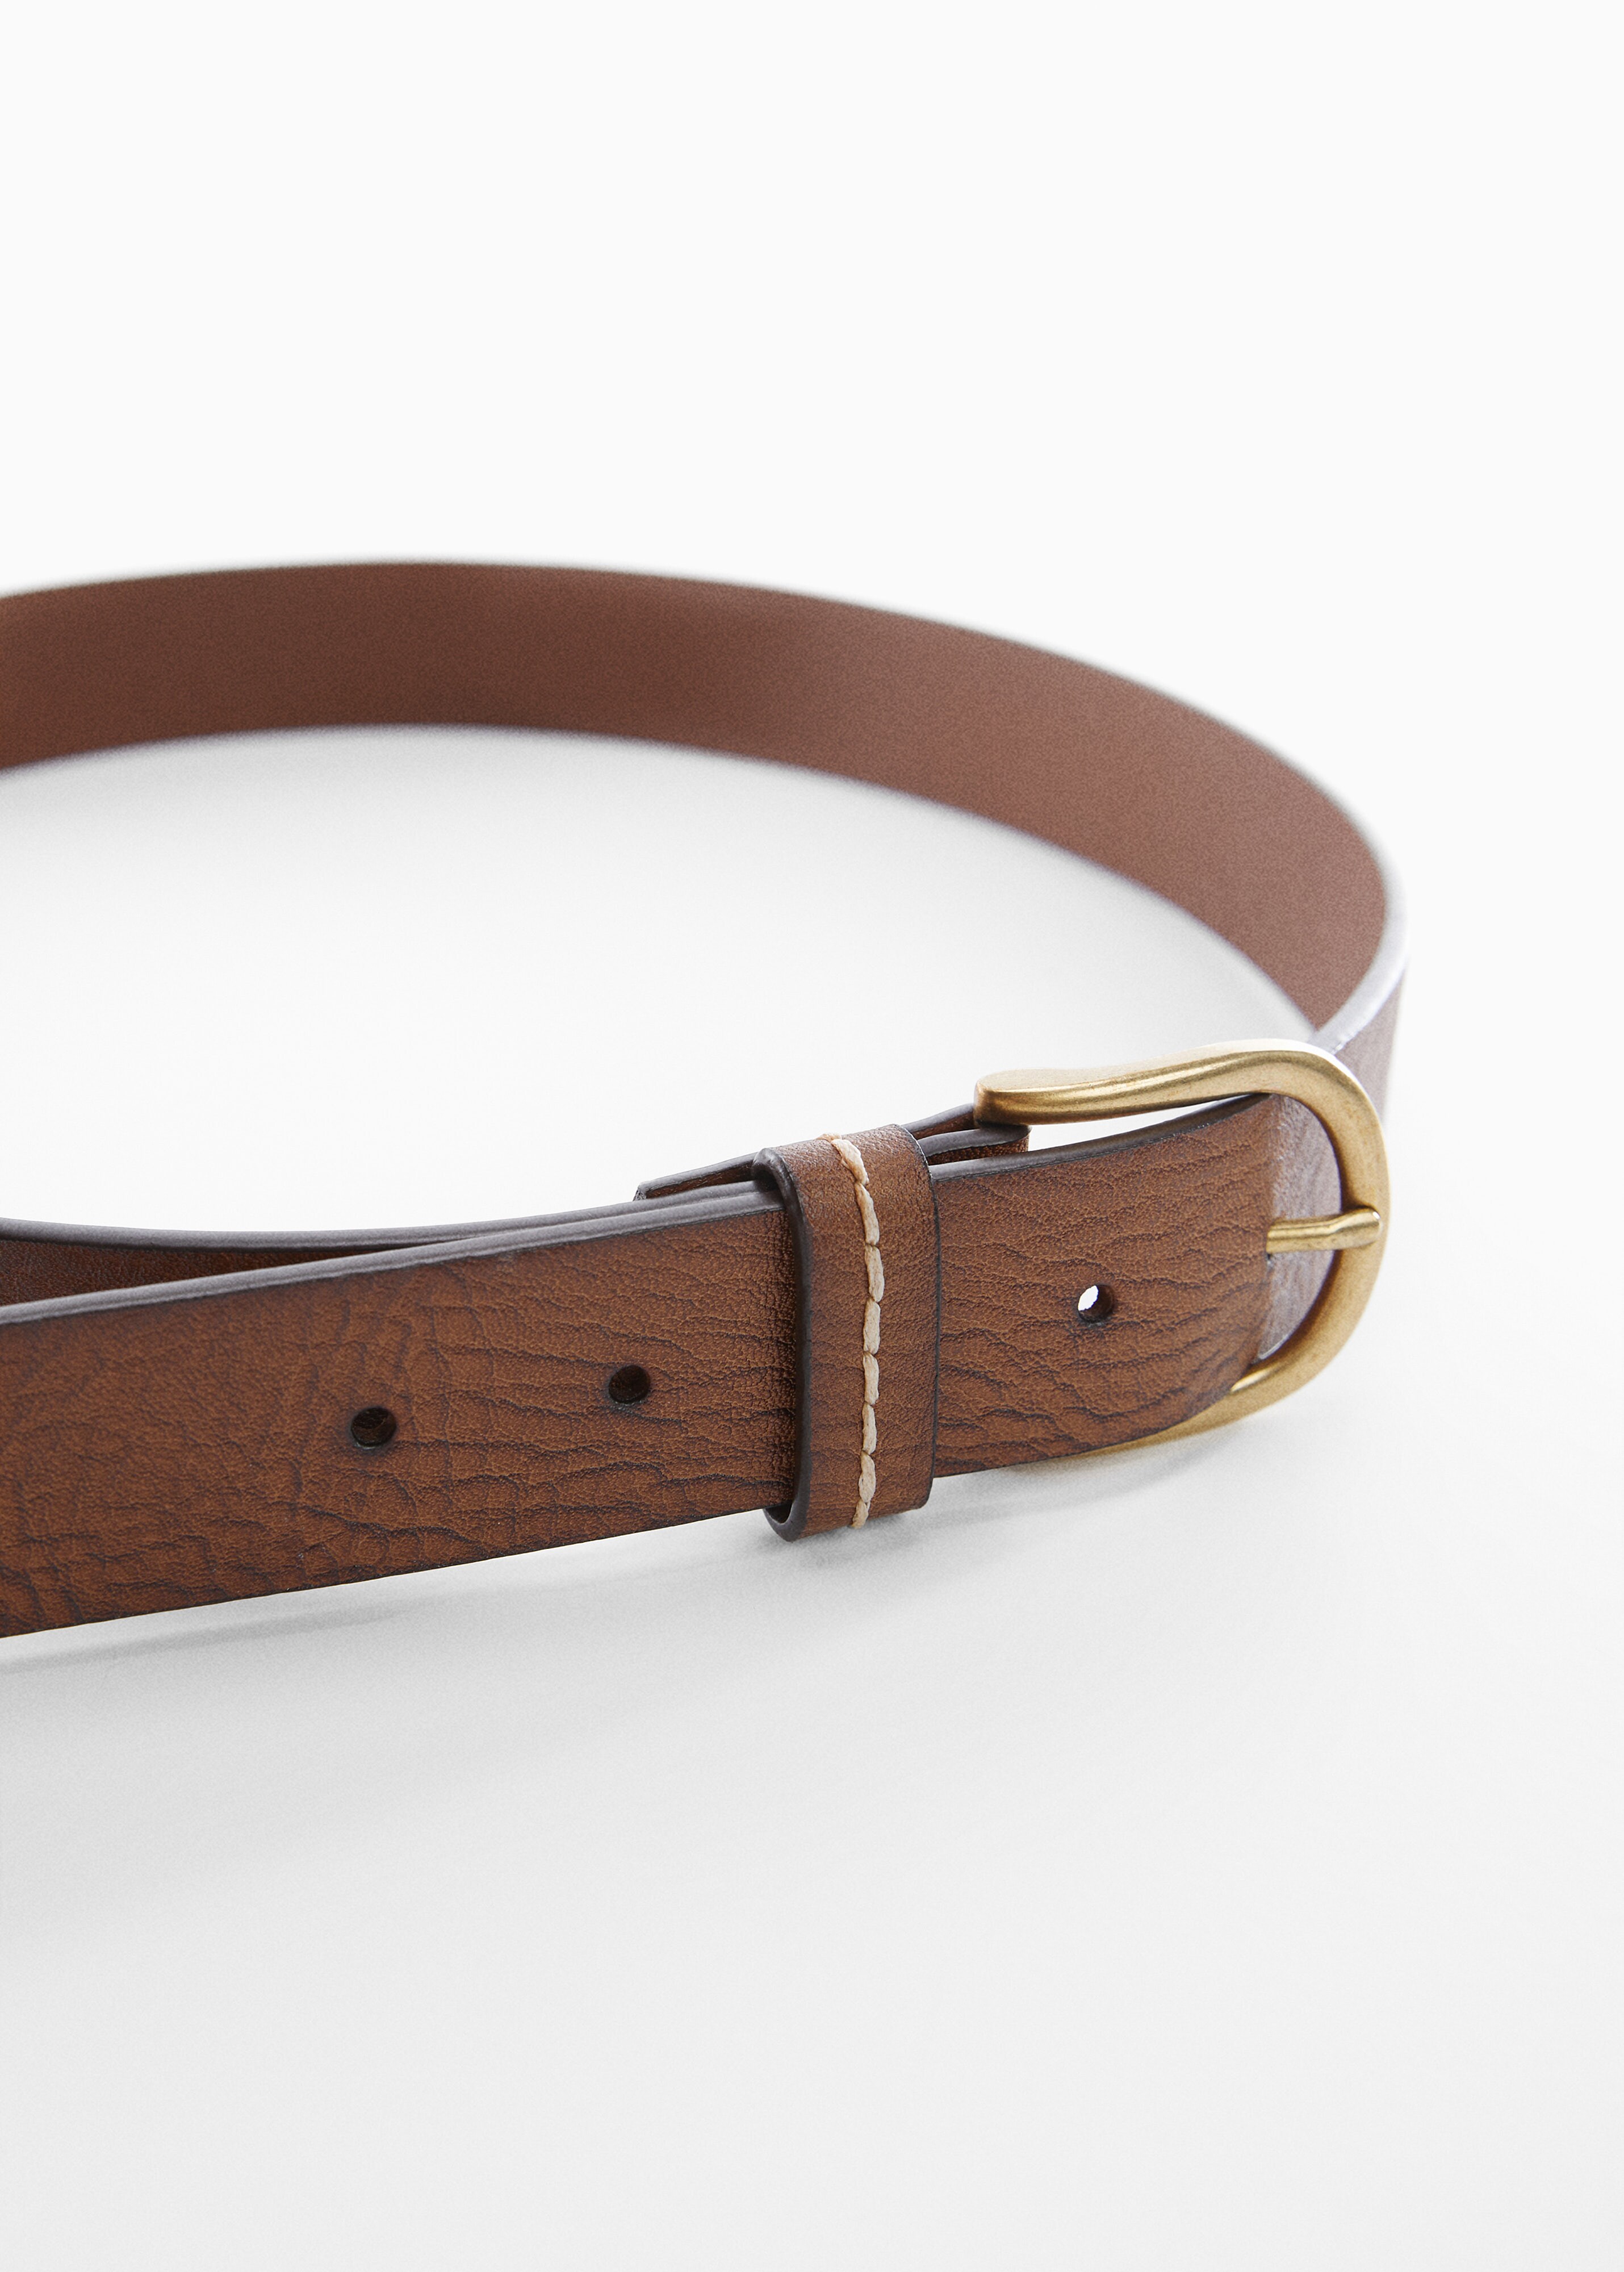 Pebbled leather belt - Details of the article 1